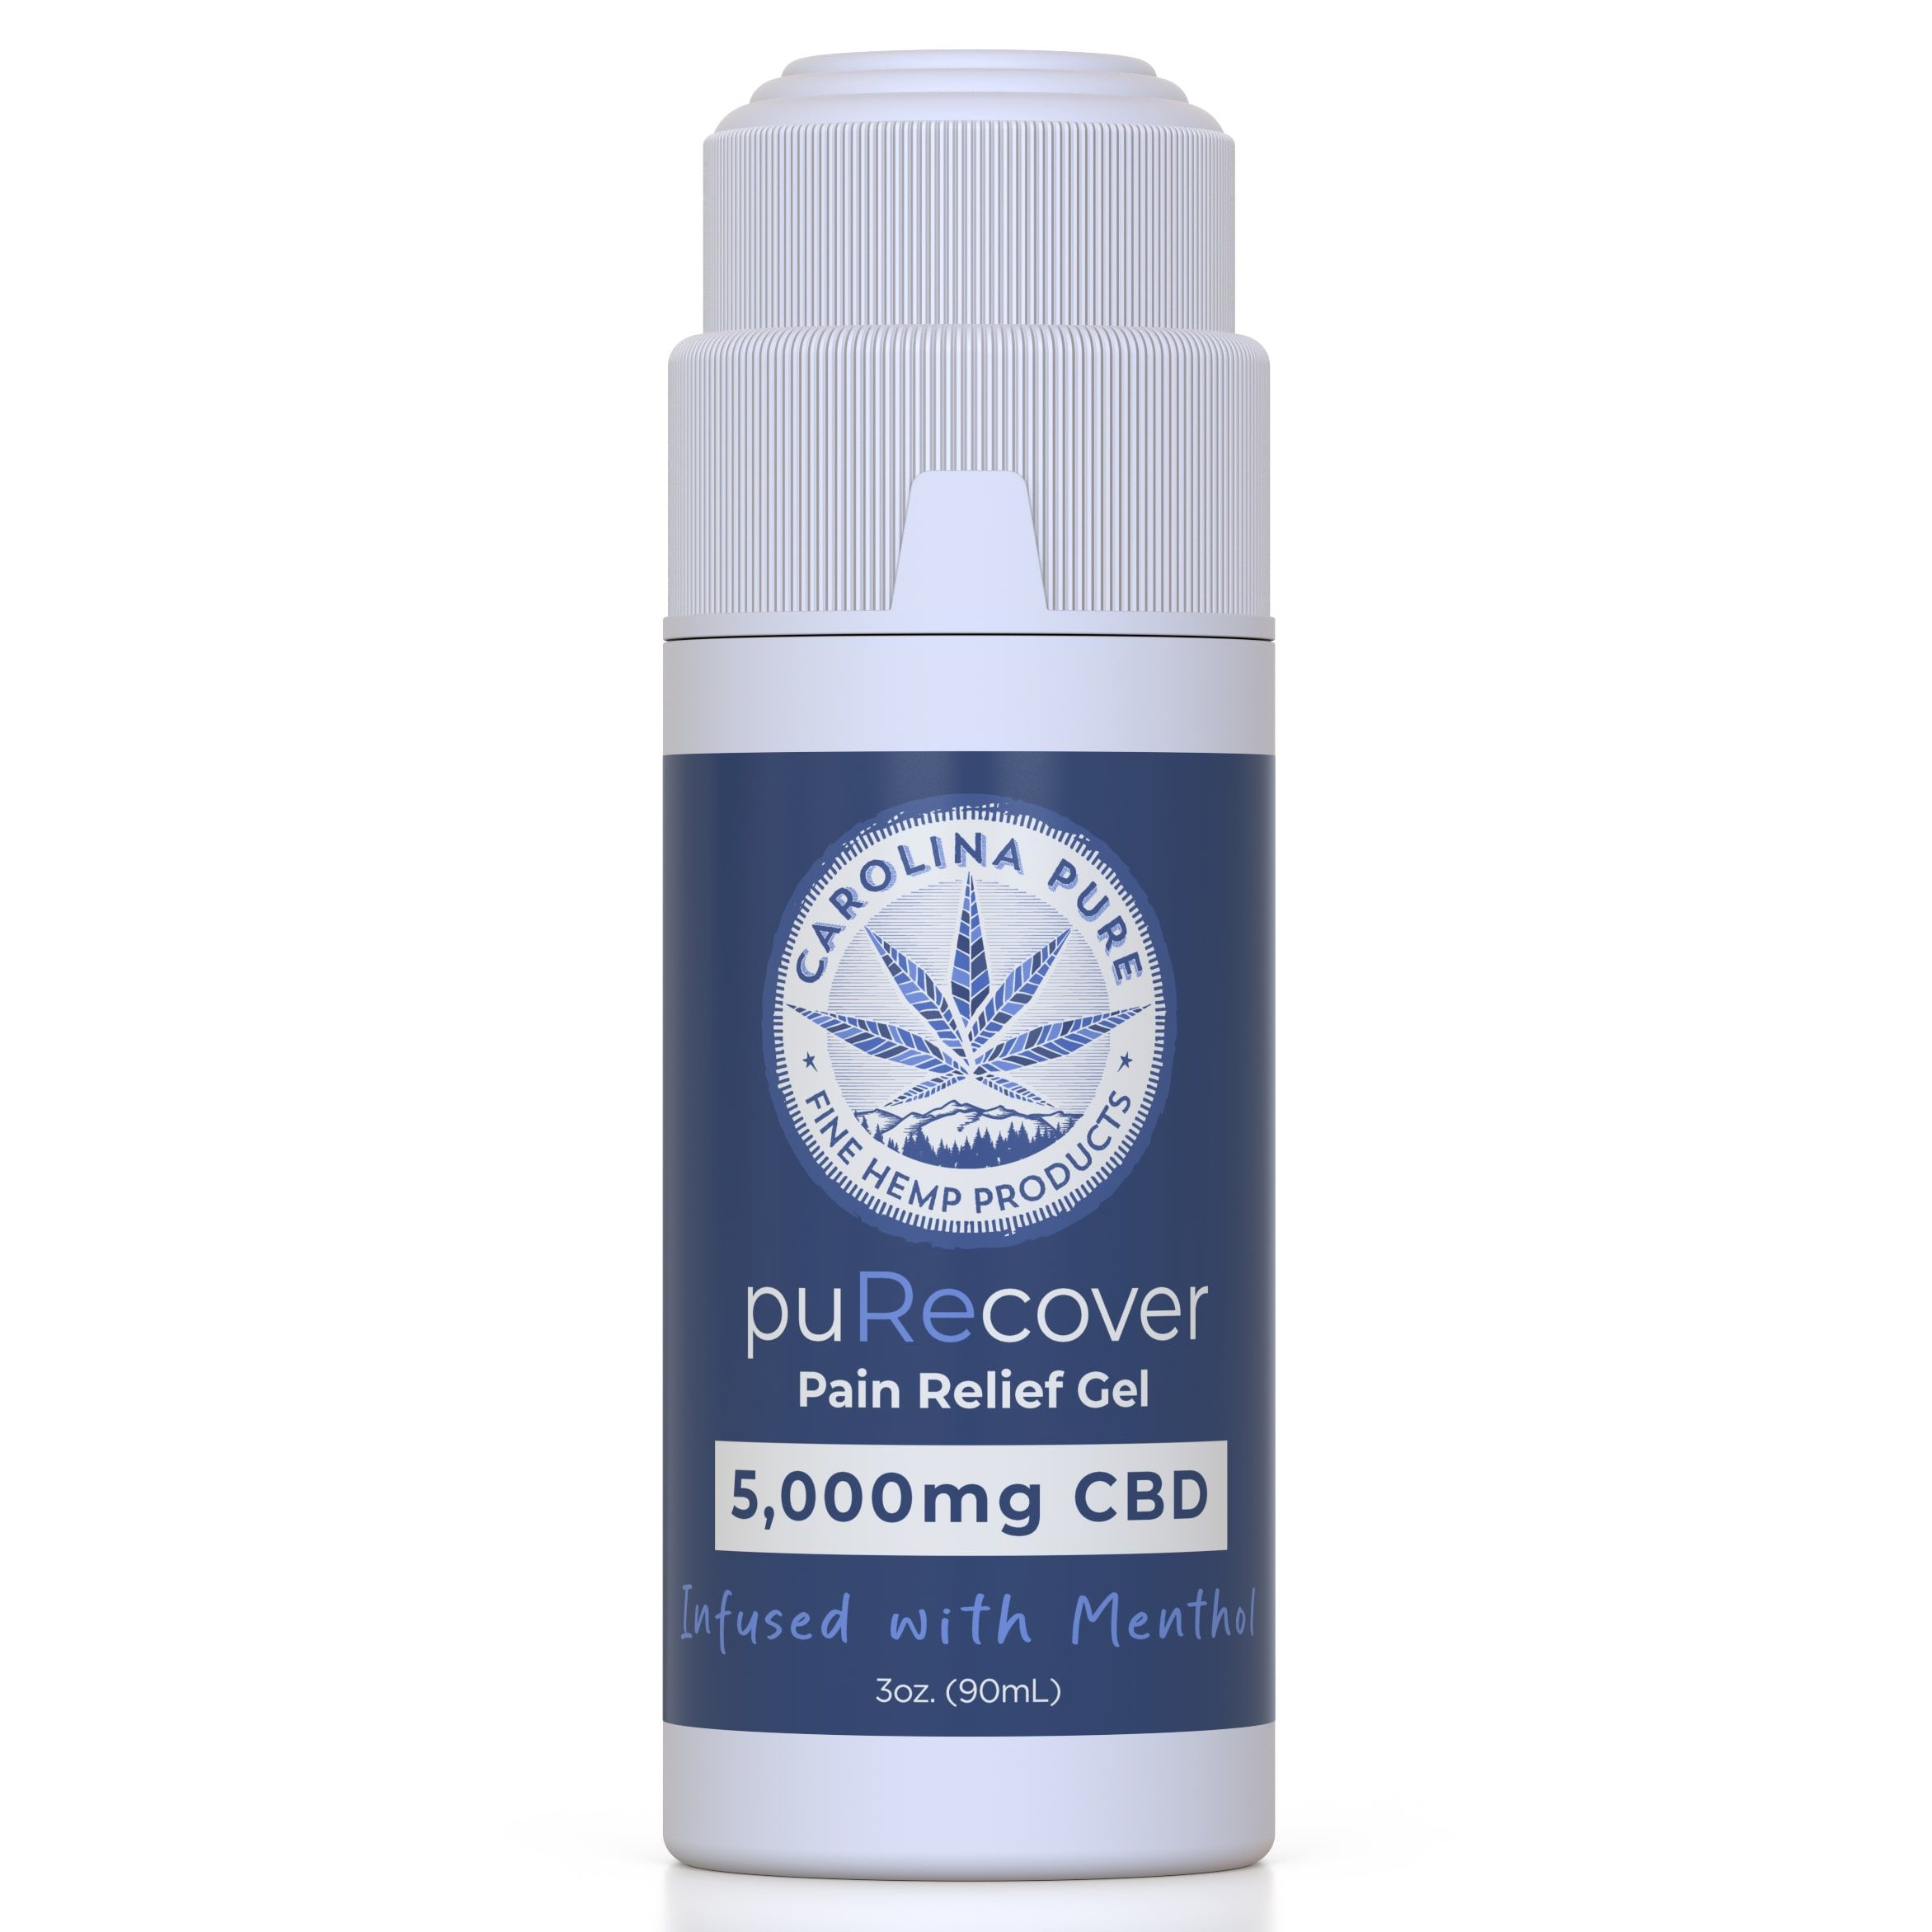 puRecover